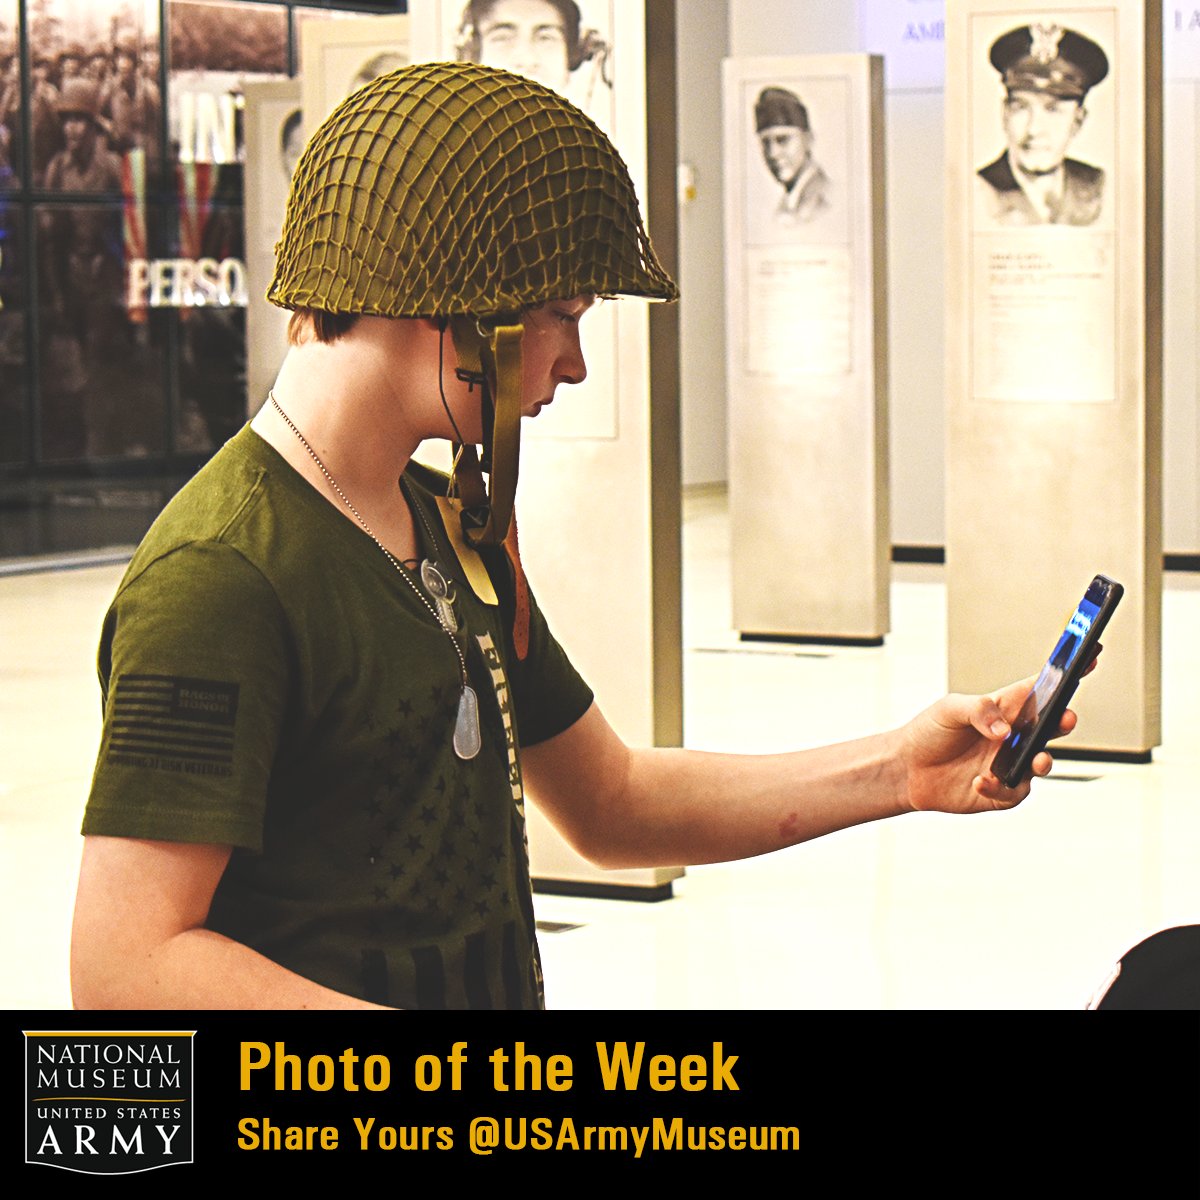 Check out this candid shot from a recent school visitor who wanted to snap a selfie with an M1 helmet from the Education Department's #WorldWarII paratrooper discovery cart for our #PhotoOfTheWeek.